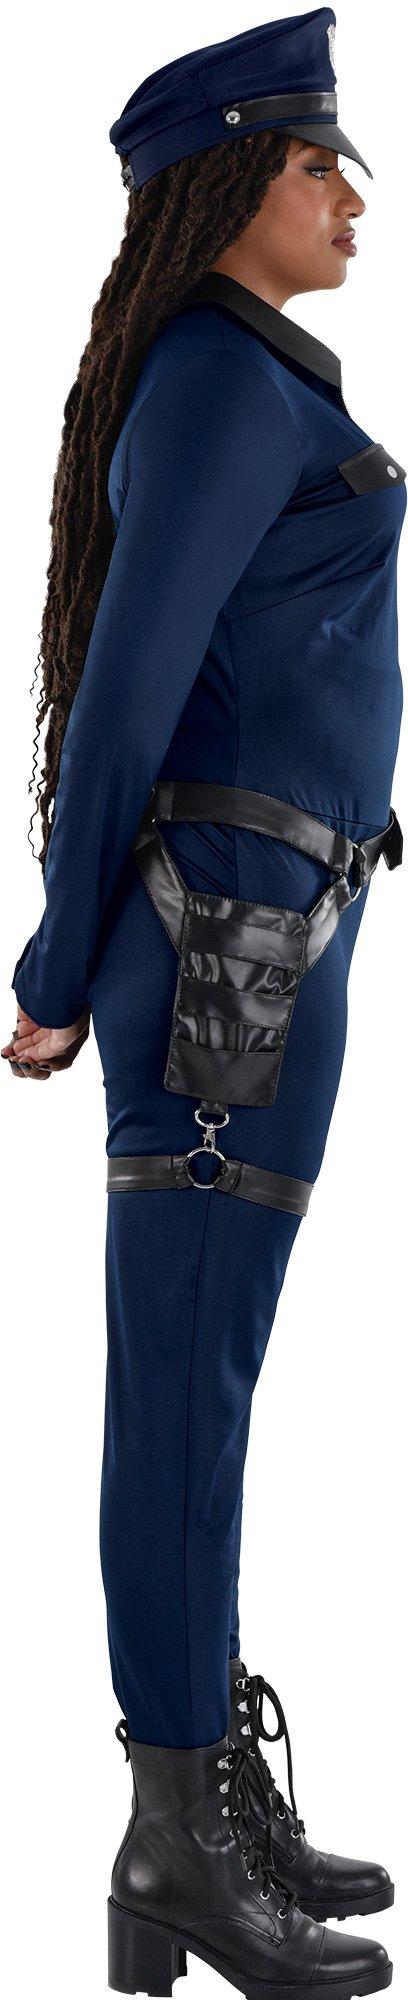 Best Deal for Adult On Patrol Police Costume - Plus XXL (48-52